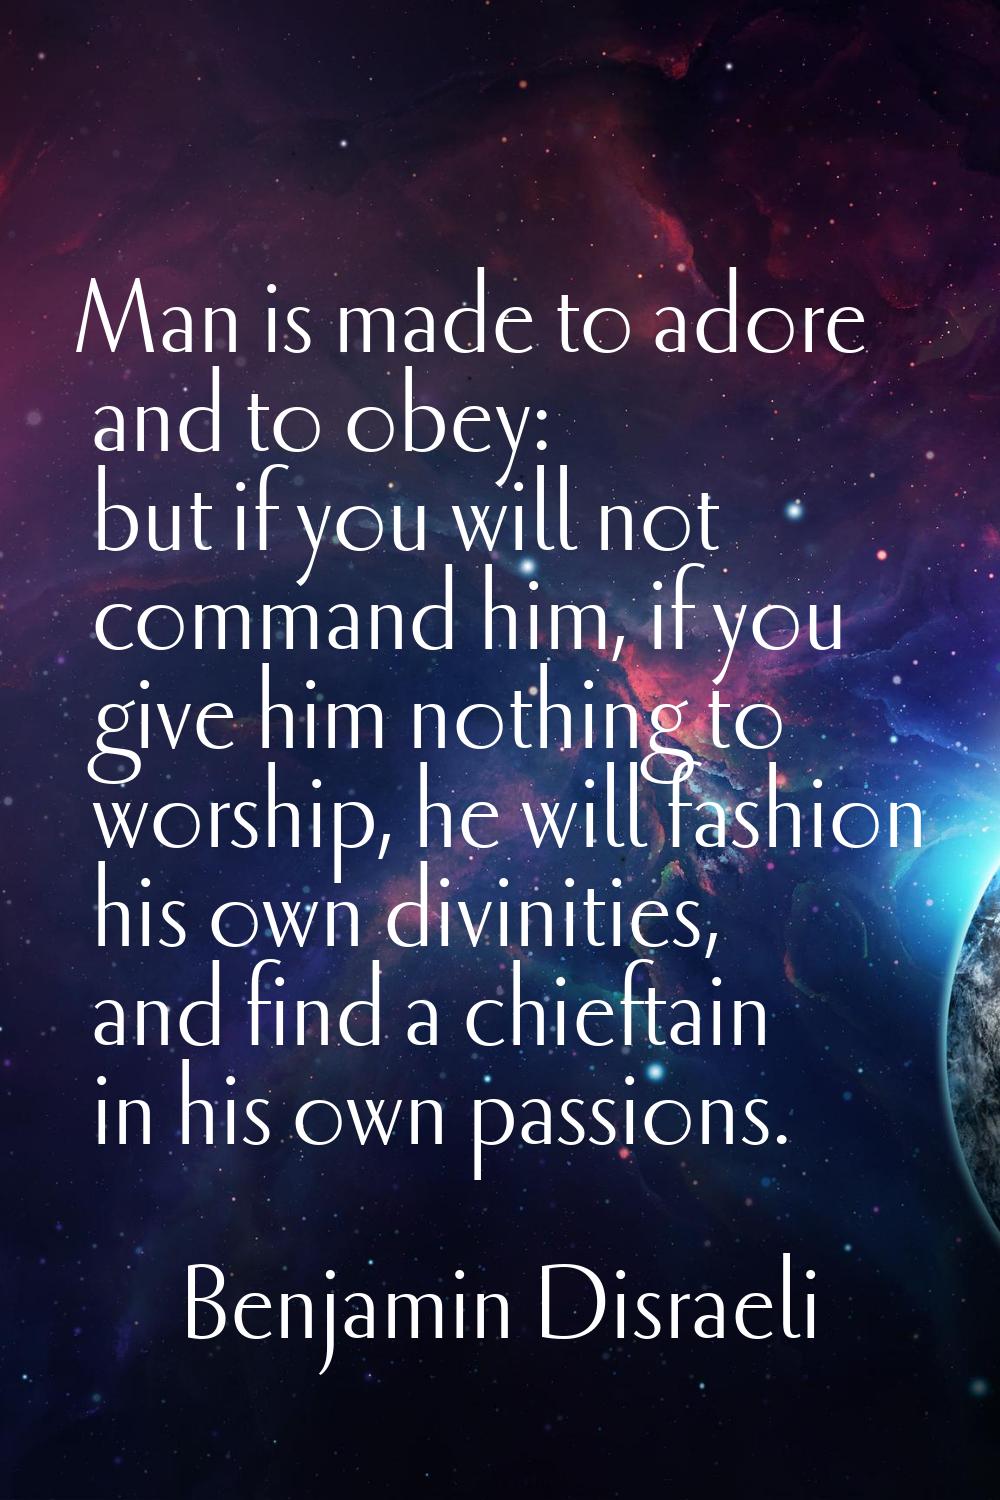 Man is made to adore and to obey: but if you will not command him, if you give him nothing to worsh